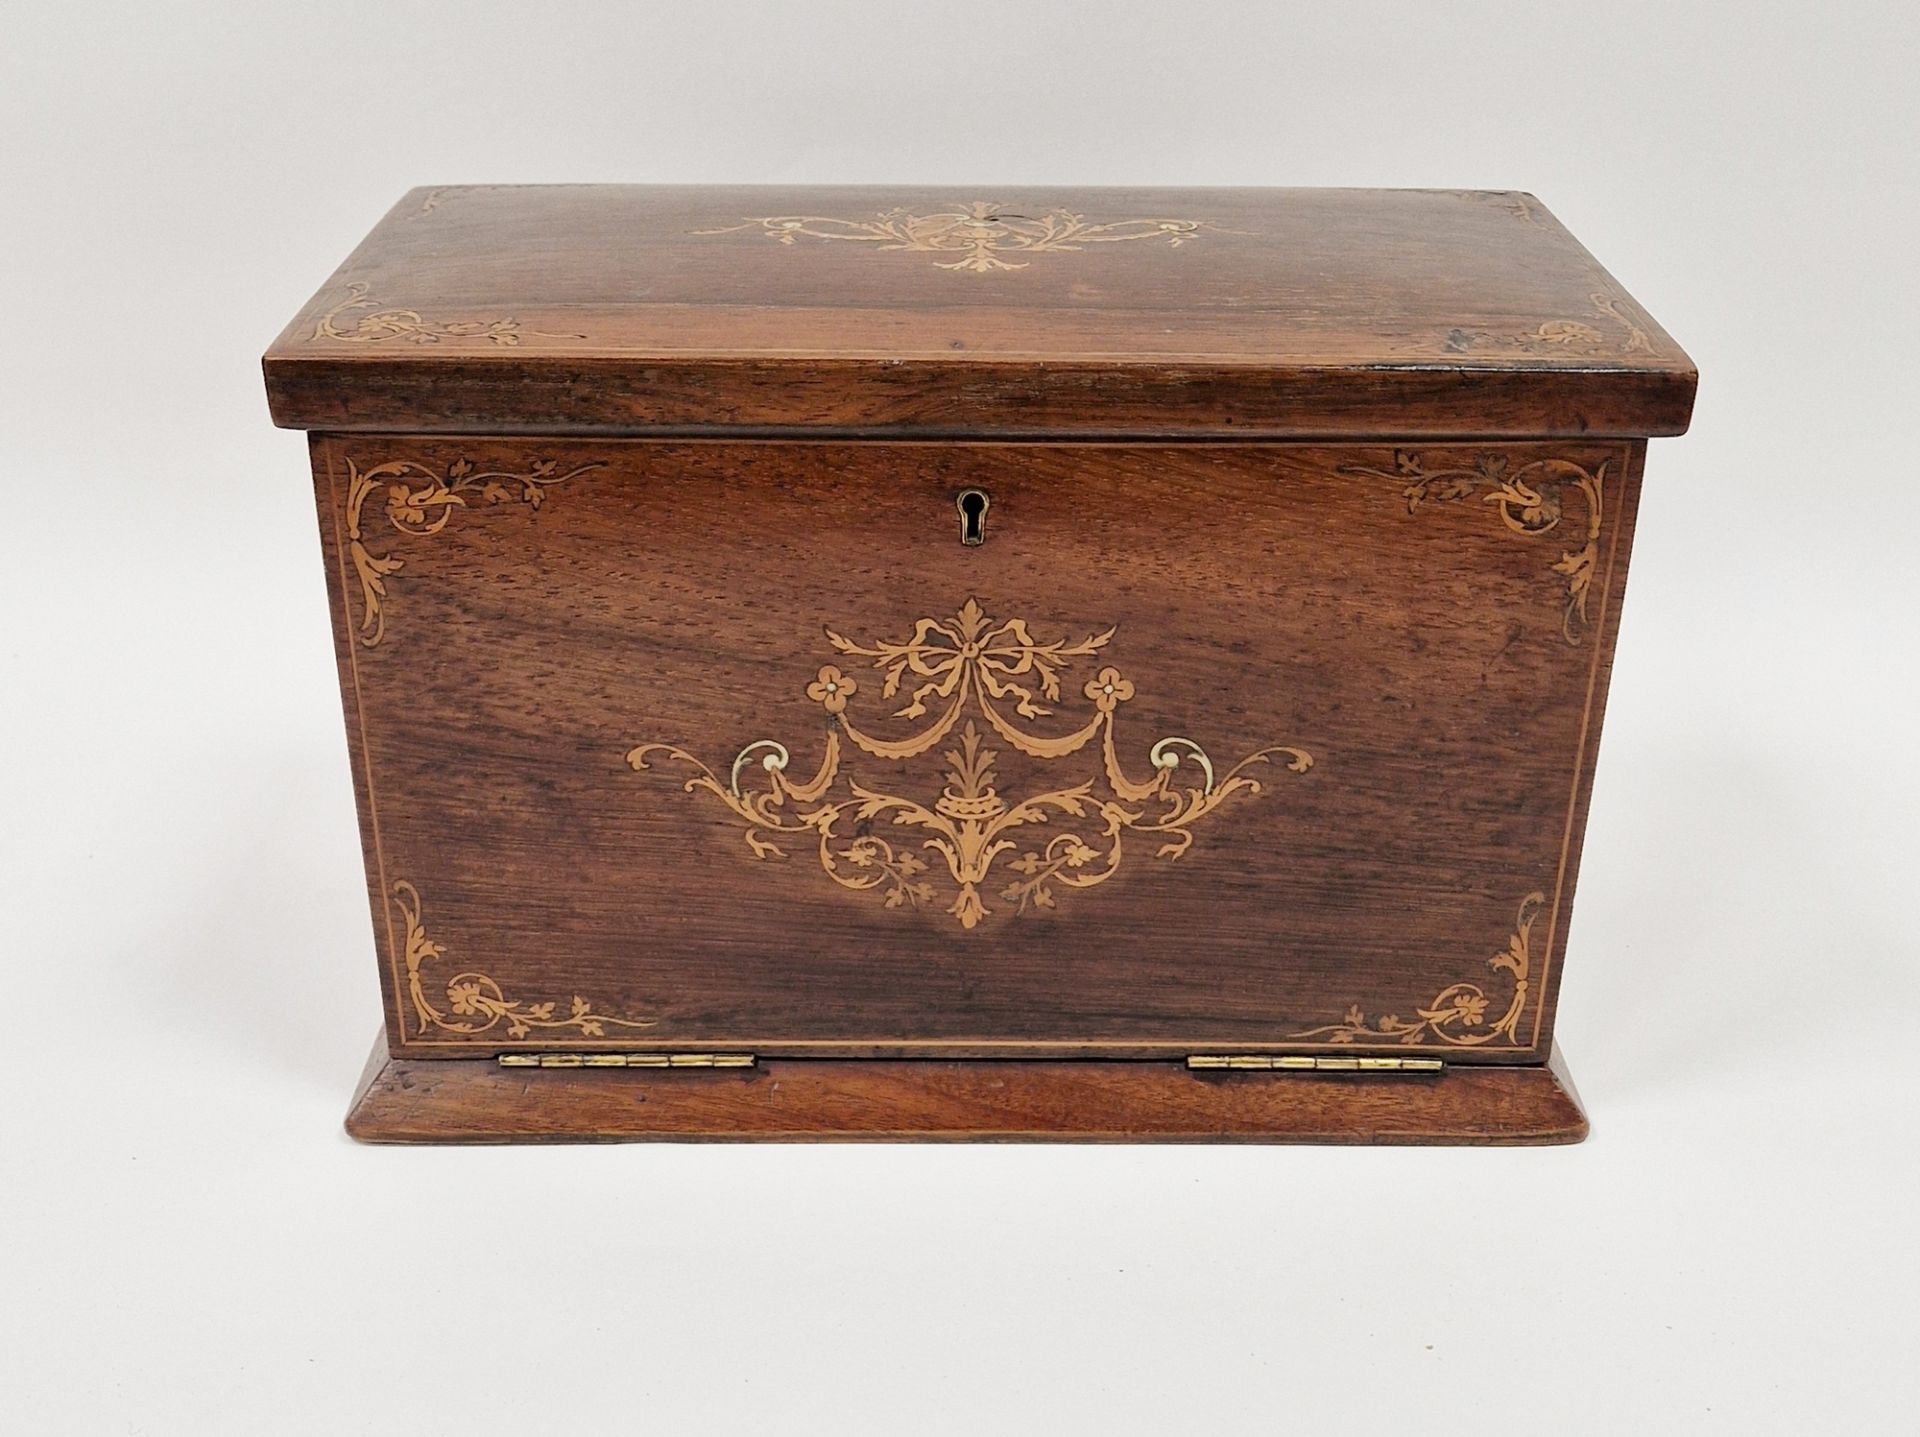 Edwardian marquetry inlaid fall-front stationery casket, the front with leather lined fold-out - Image 28 of 54